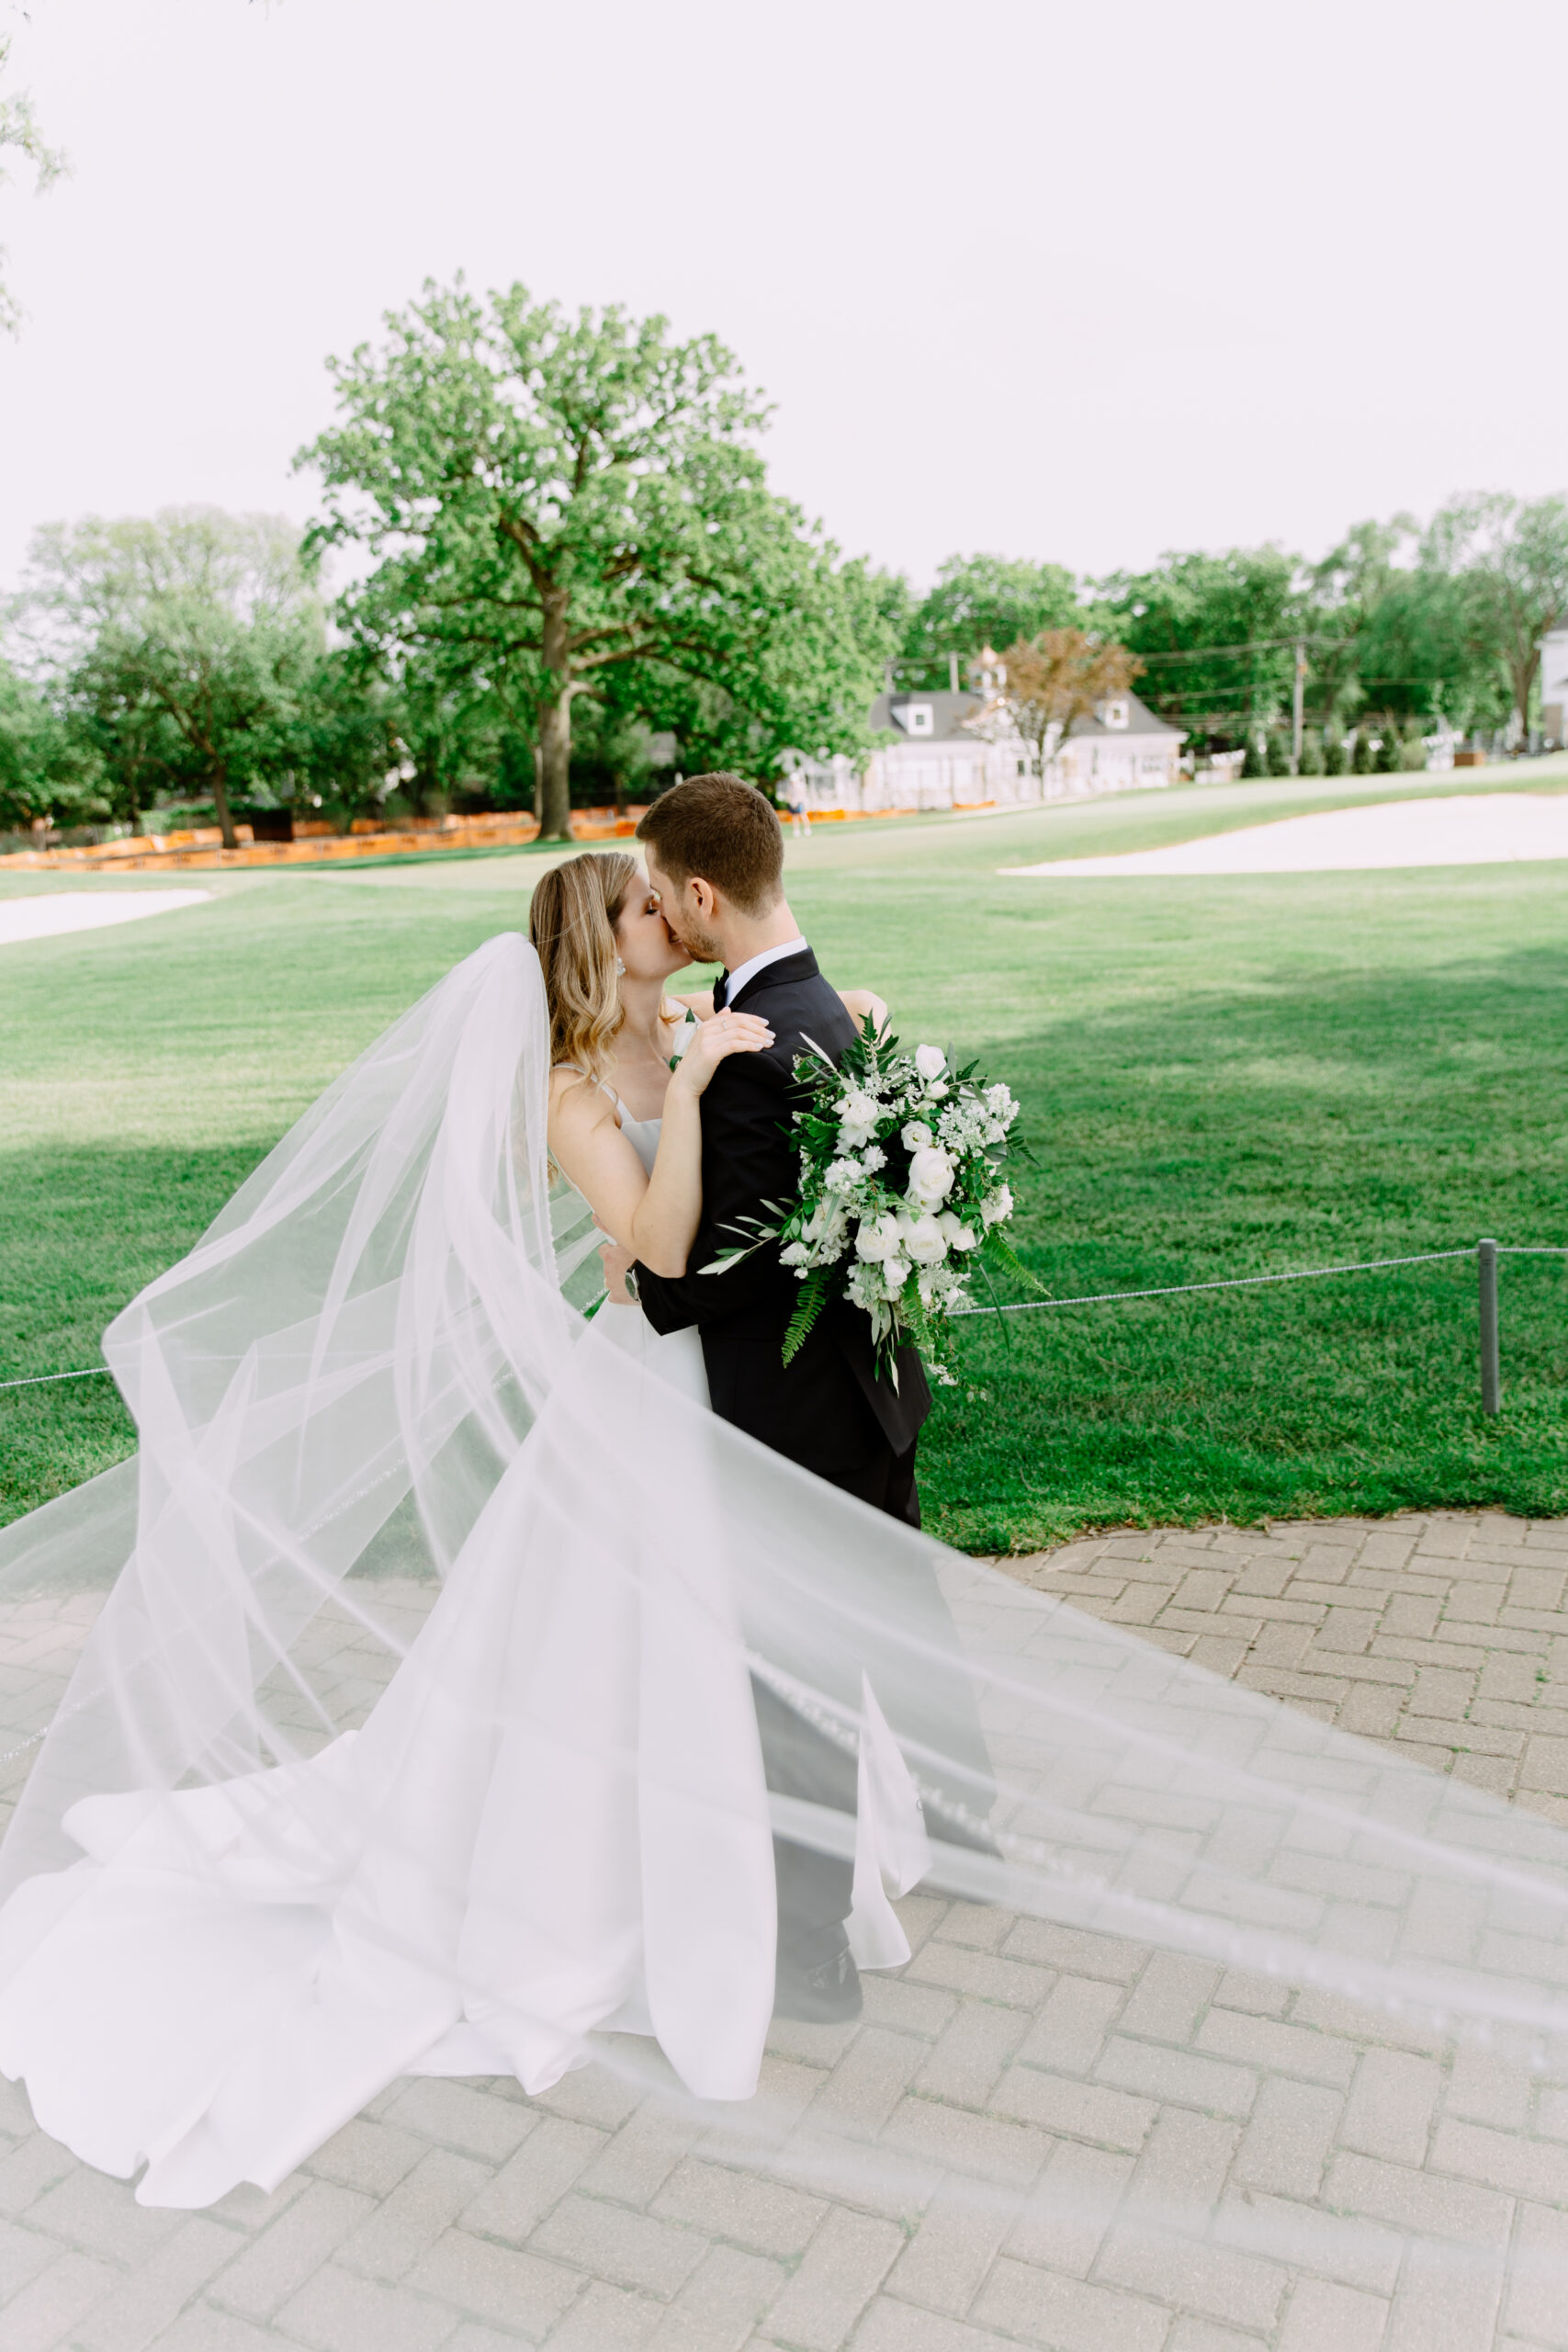 Tips for choosing your wedding photographer Are you planning your dream wedding in the Windy City? One of the most important decisions you'll make is choosing a wedding photographer in Chicago